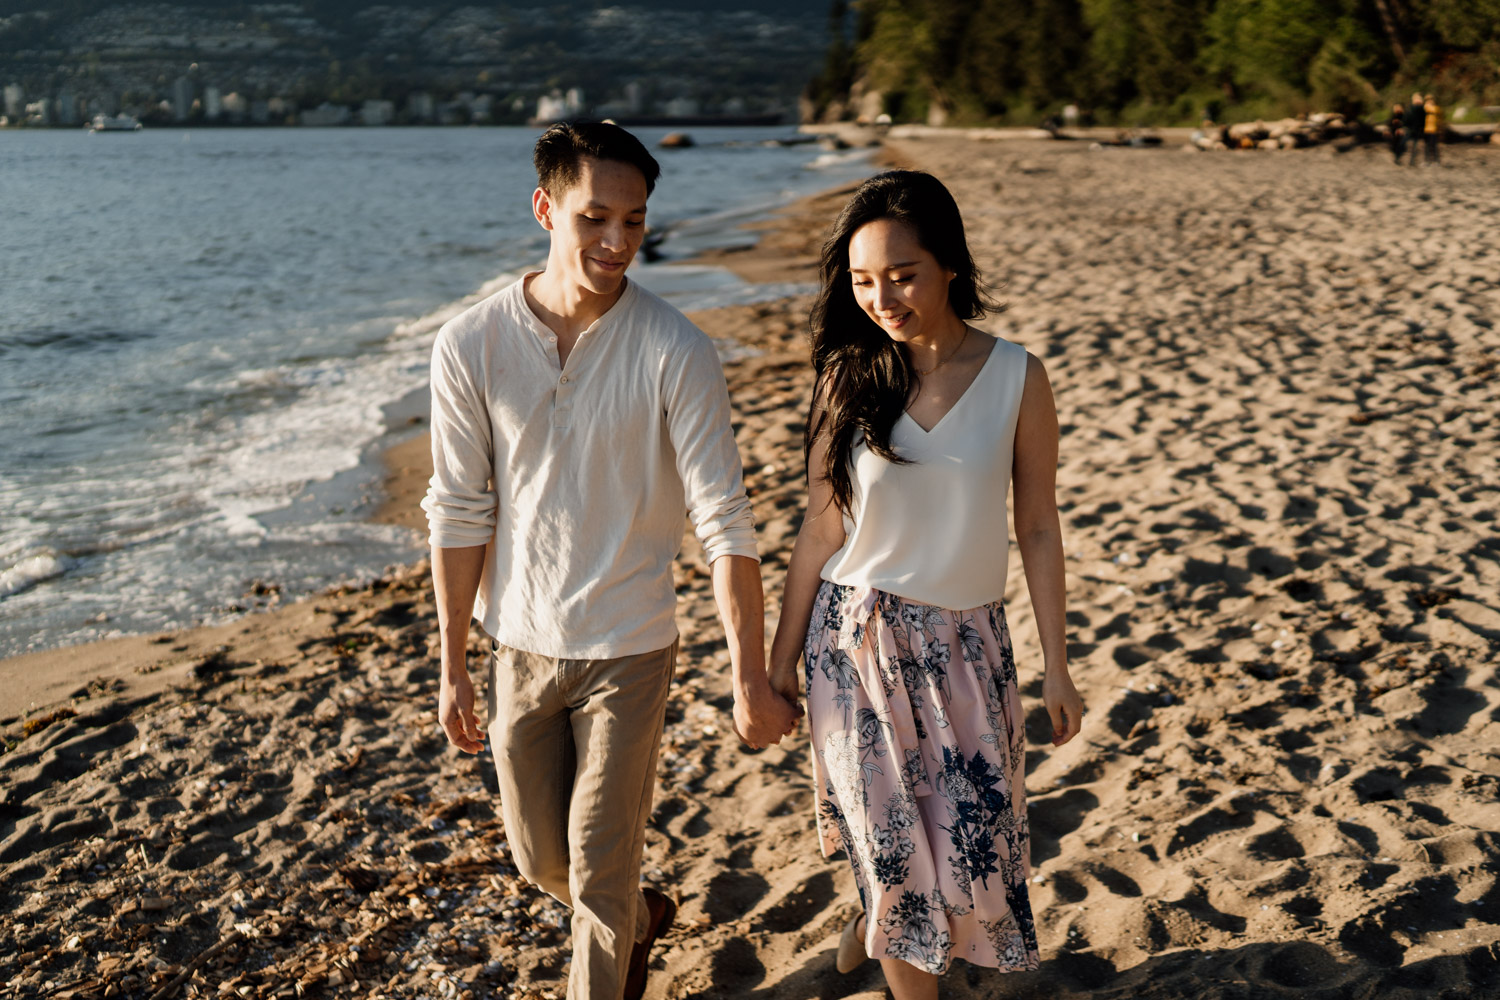 third beach engagement photography in stanley park vancouver bc